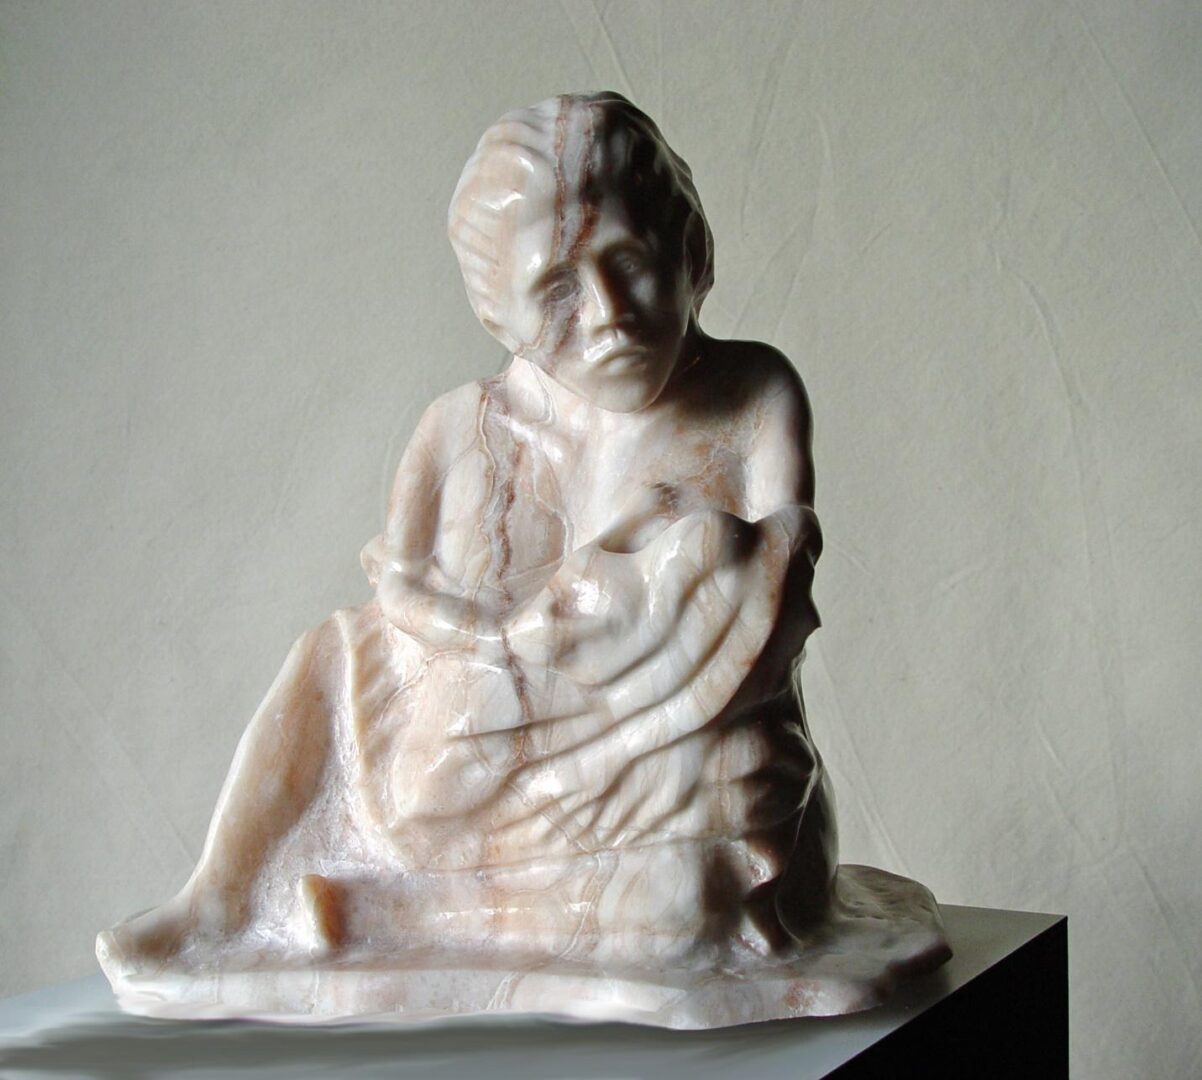 A sculpture of a woman holding a baby, part of a Sculpture Collection.